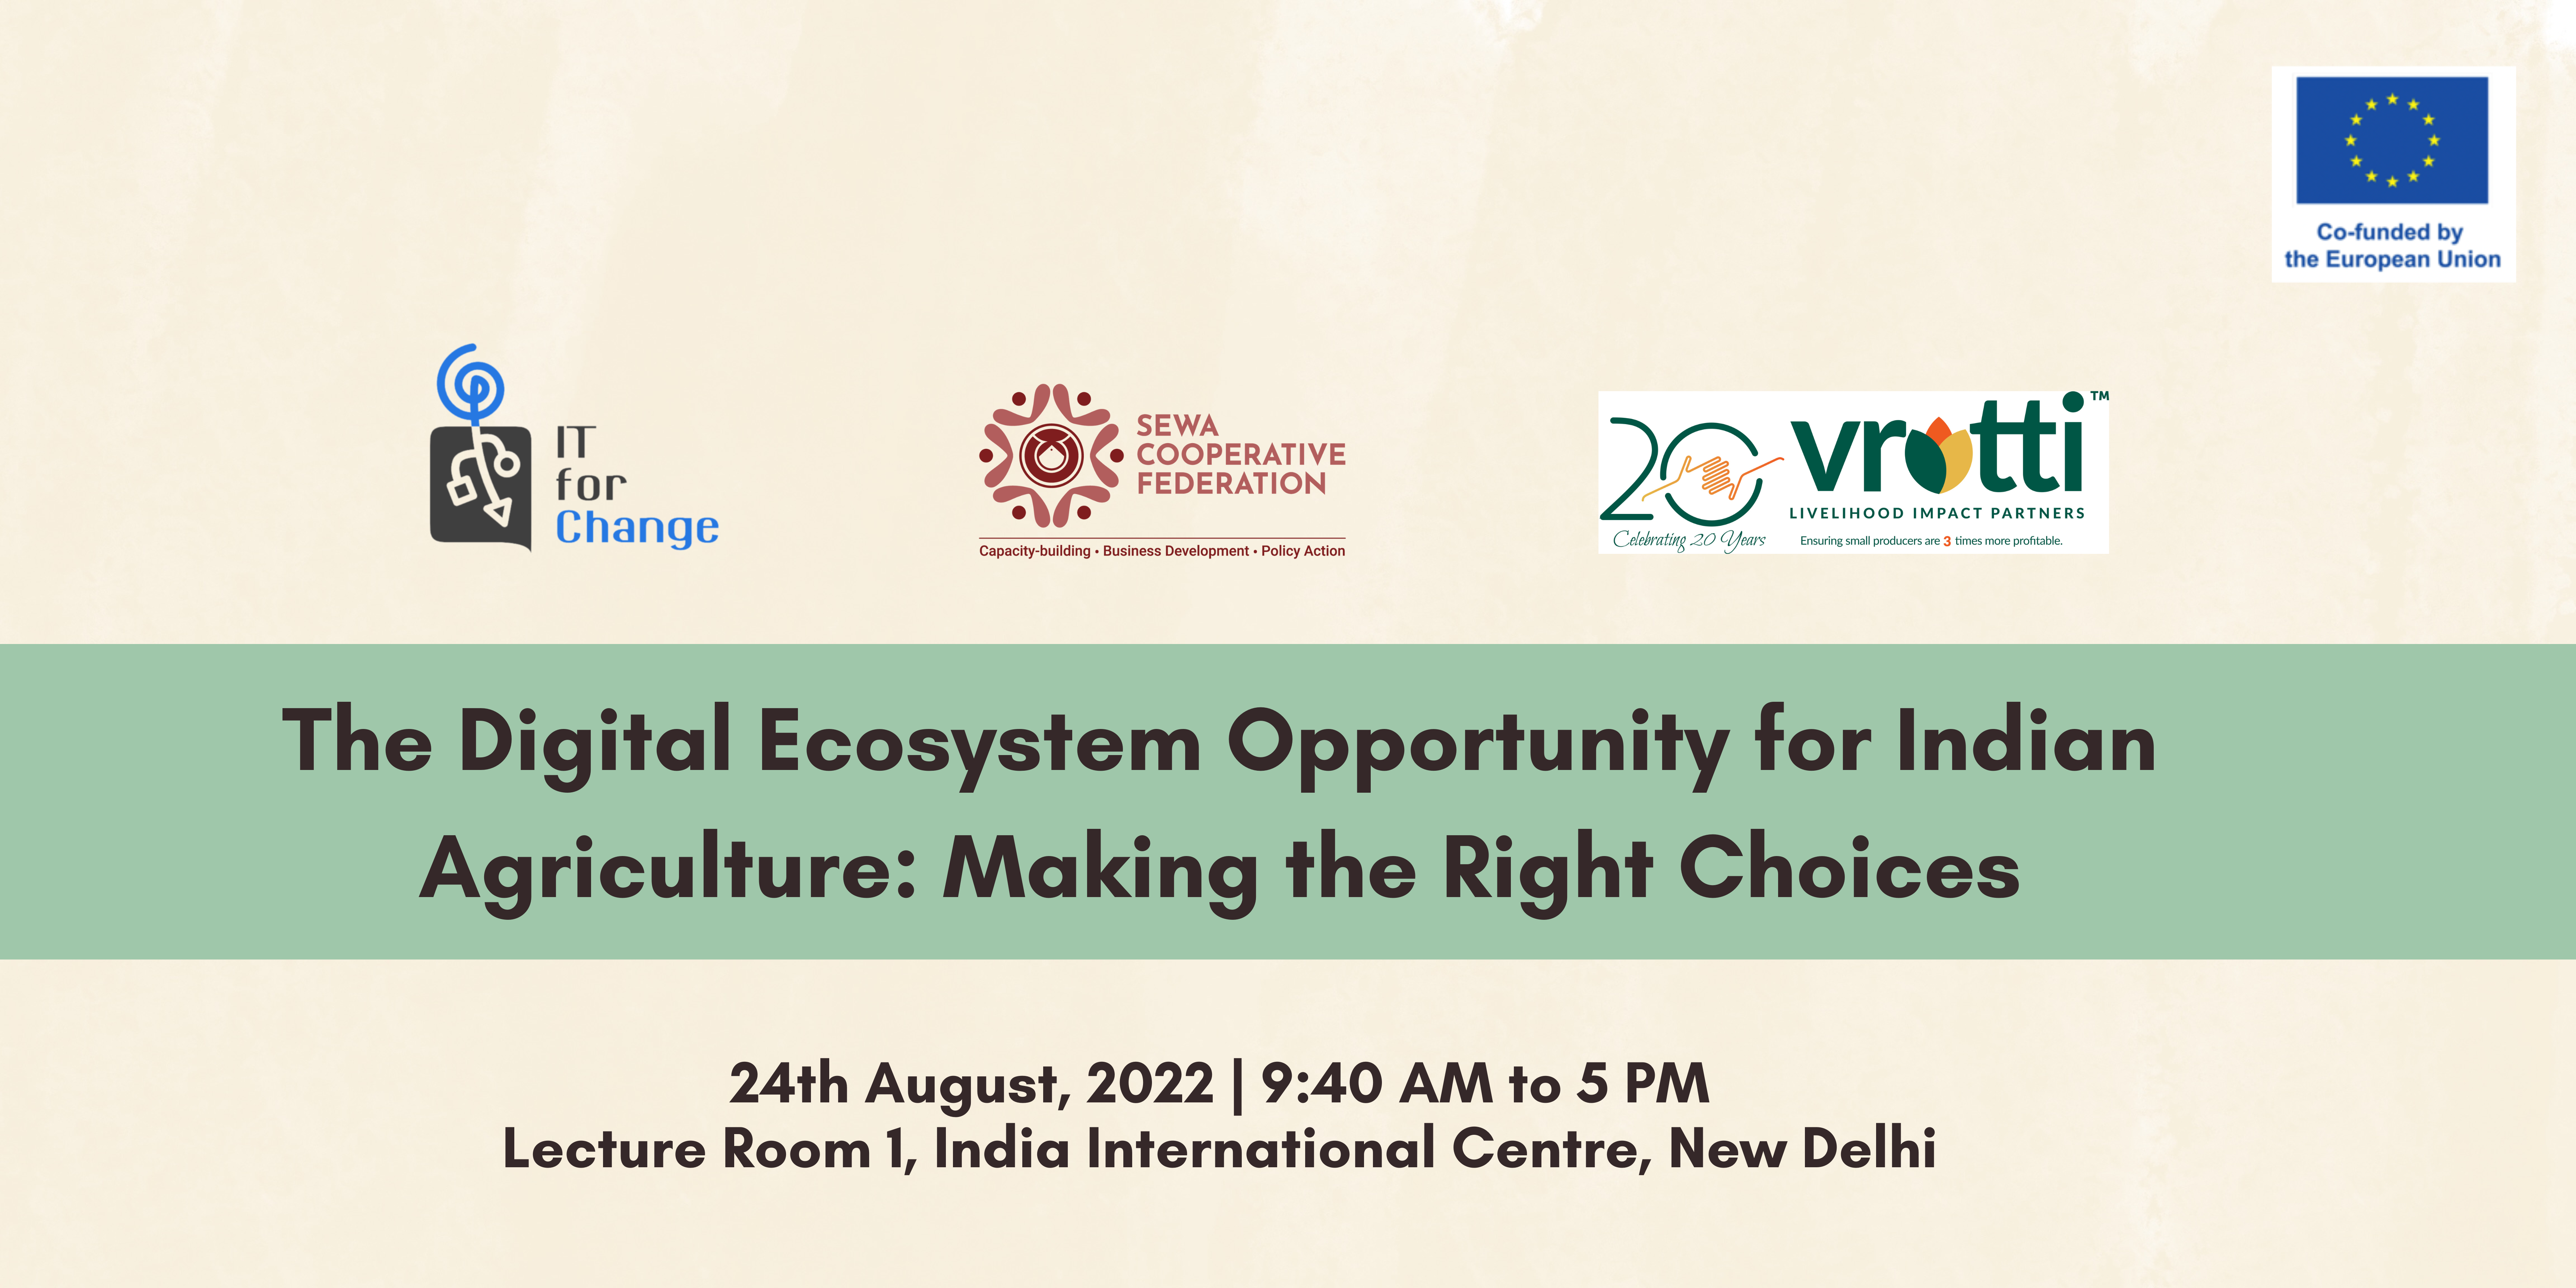 The Digital Ecosystem Opportunity for Indian Agriculture: Making the Right Choices